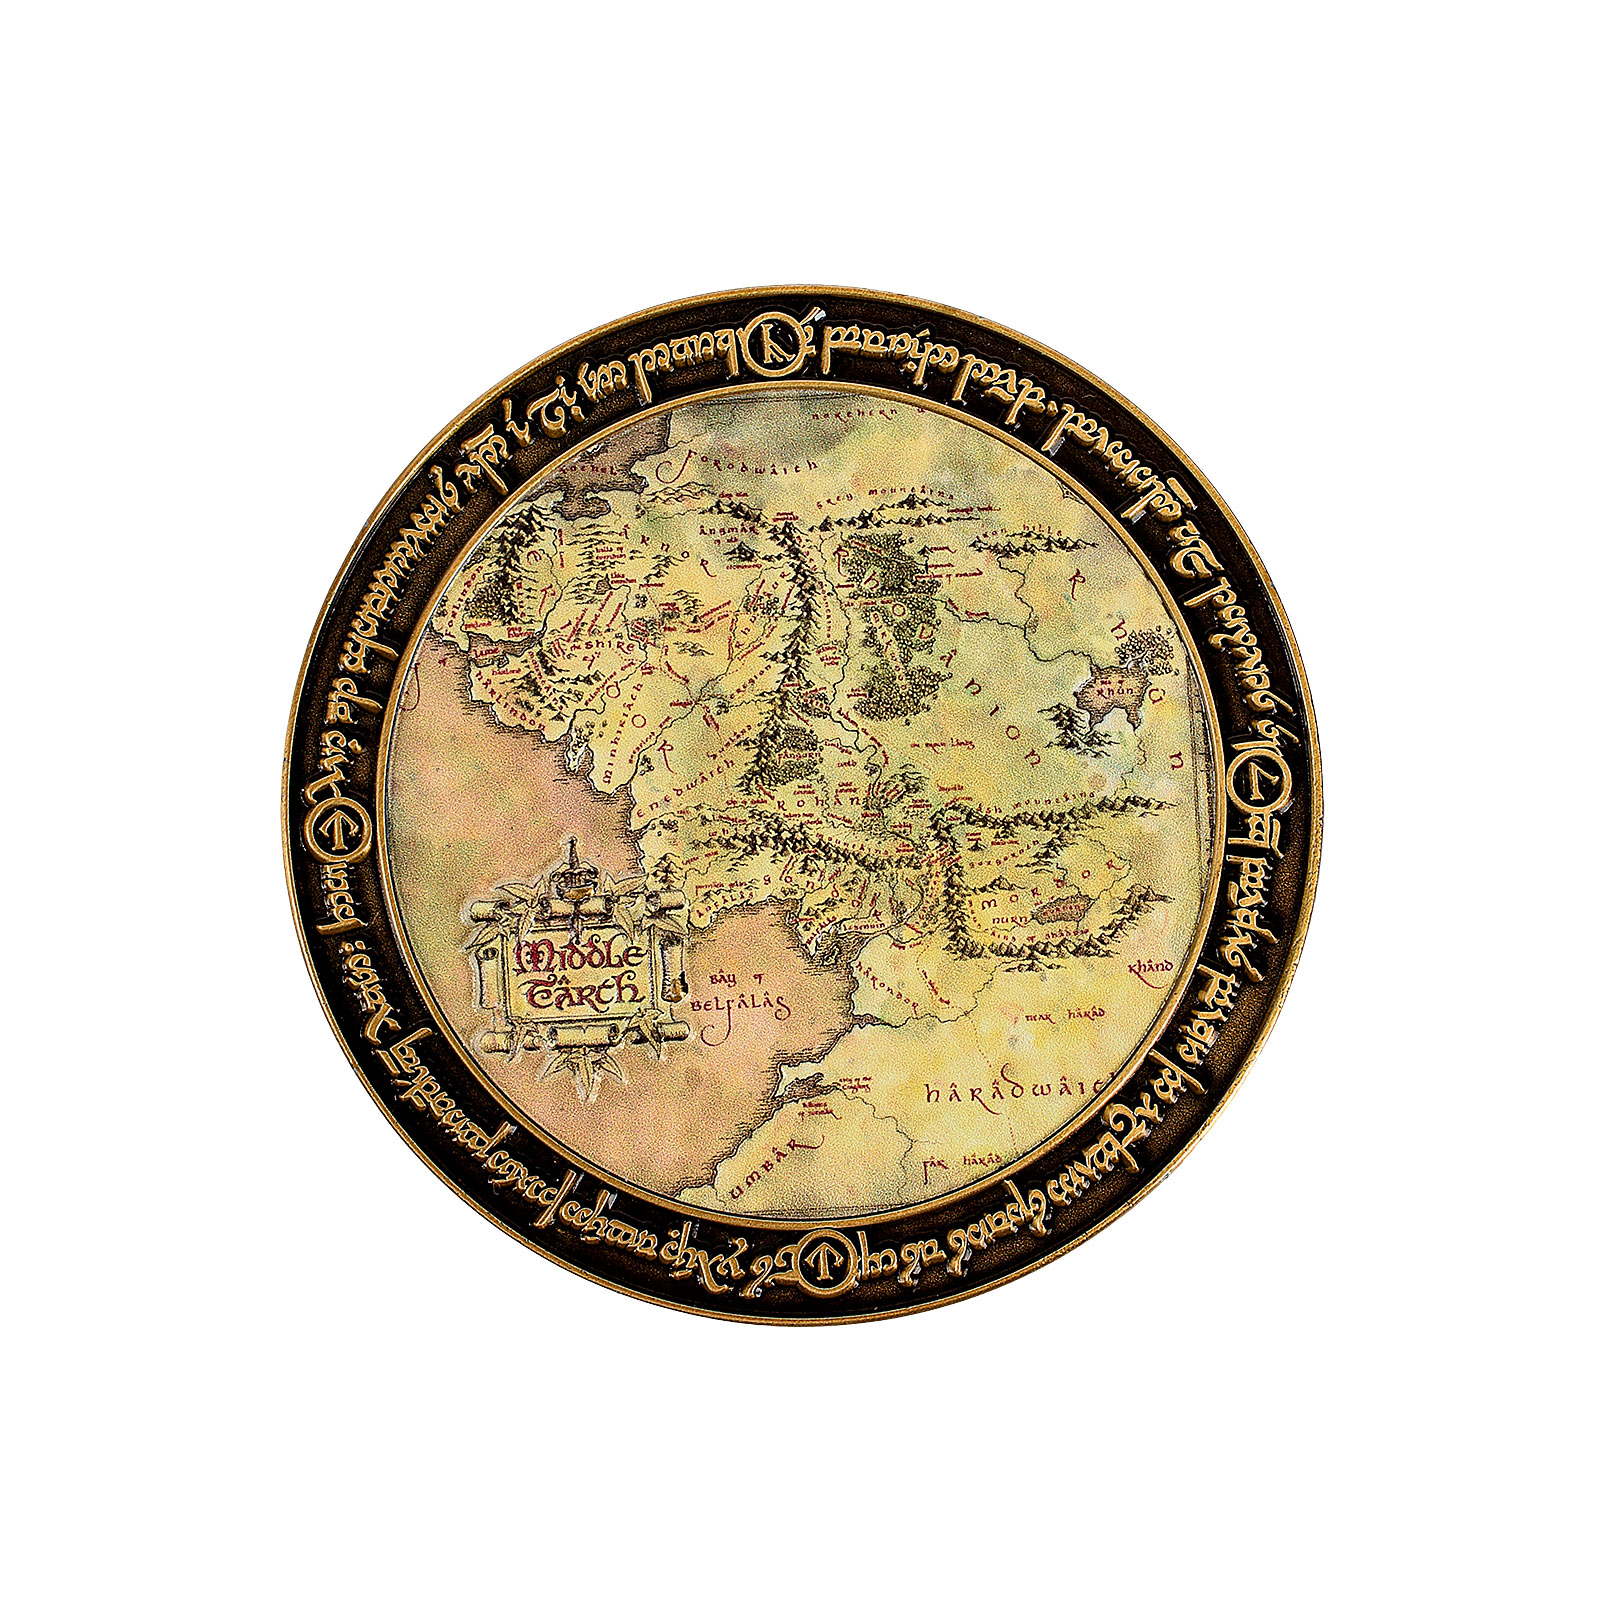 Lord of the Rings - Middle Earth Map Collector's Coin Limited Edition